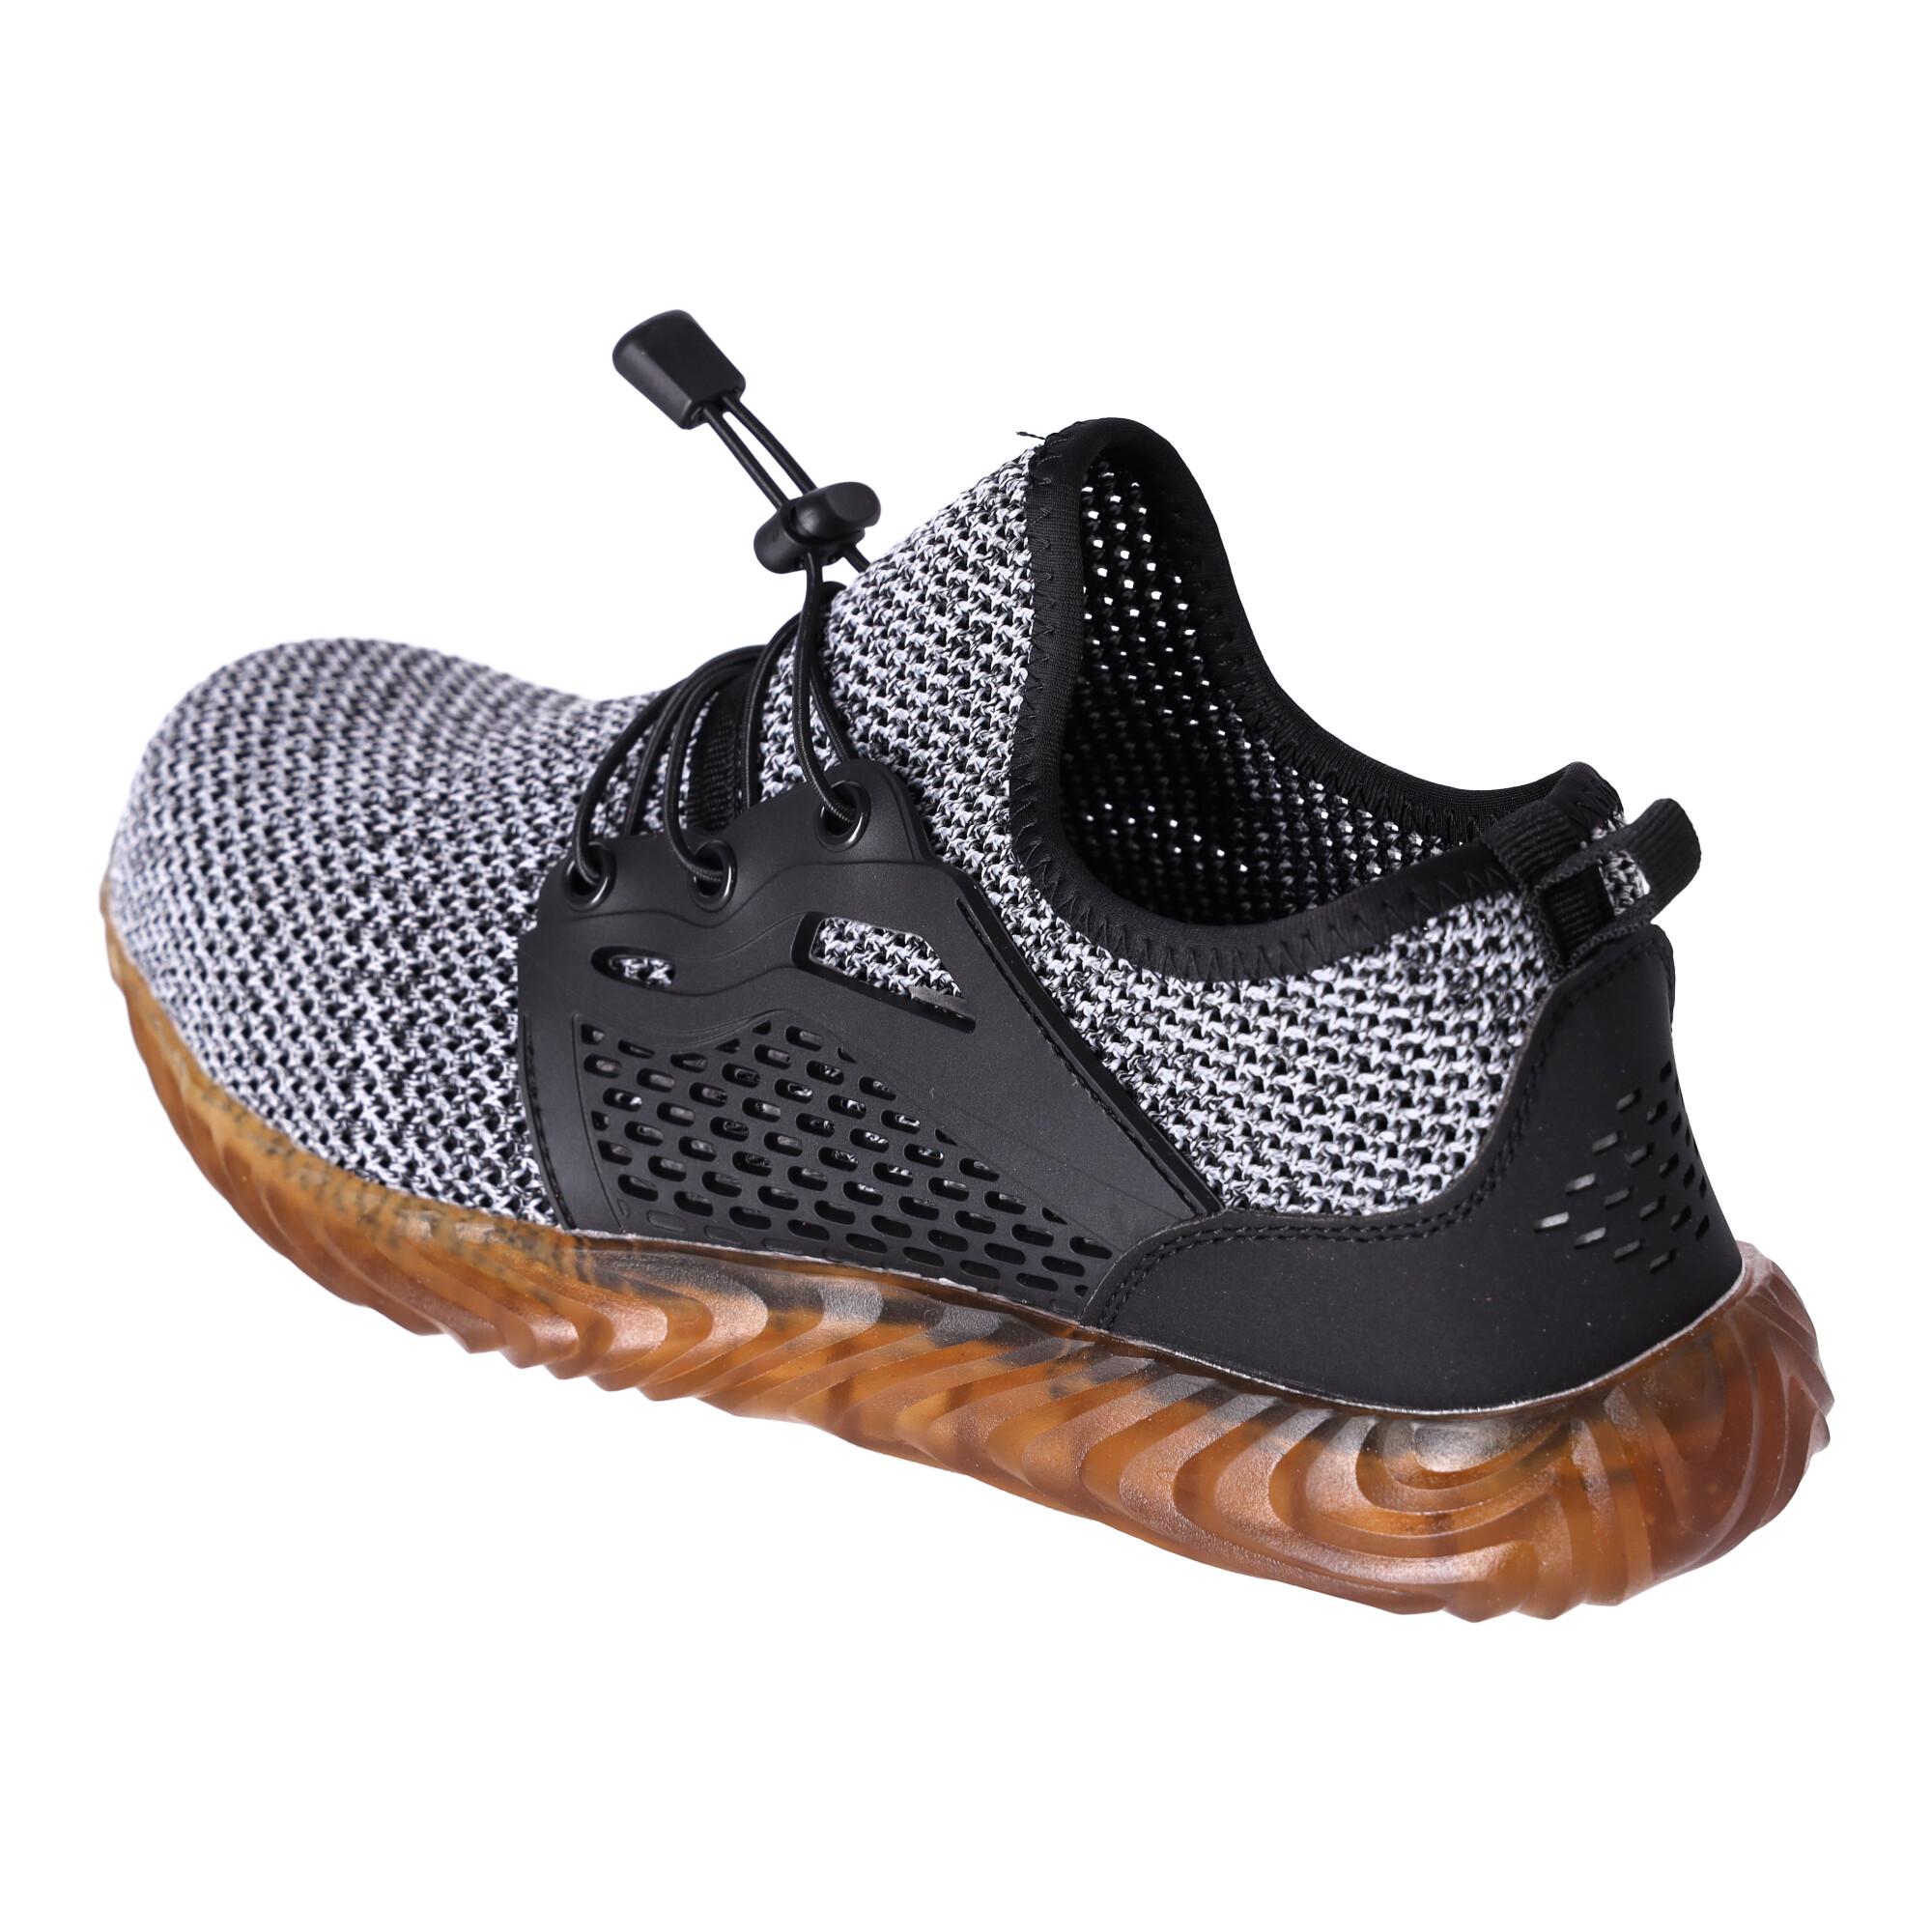 Work safety shoes Soft "41" - gray